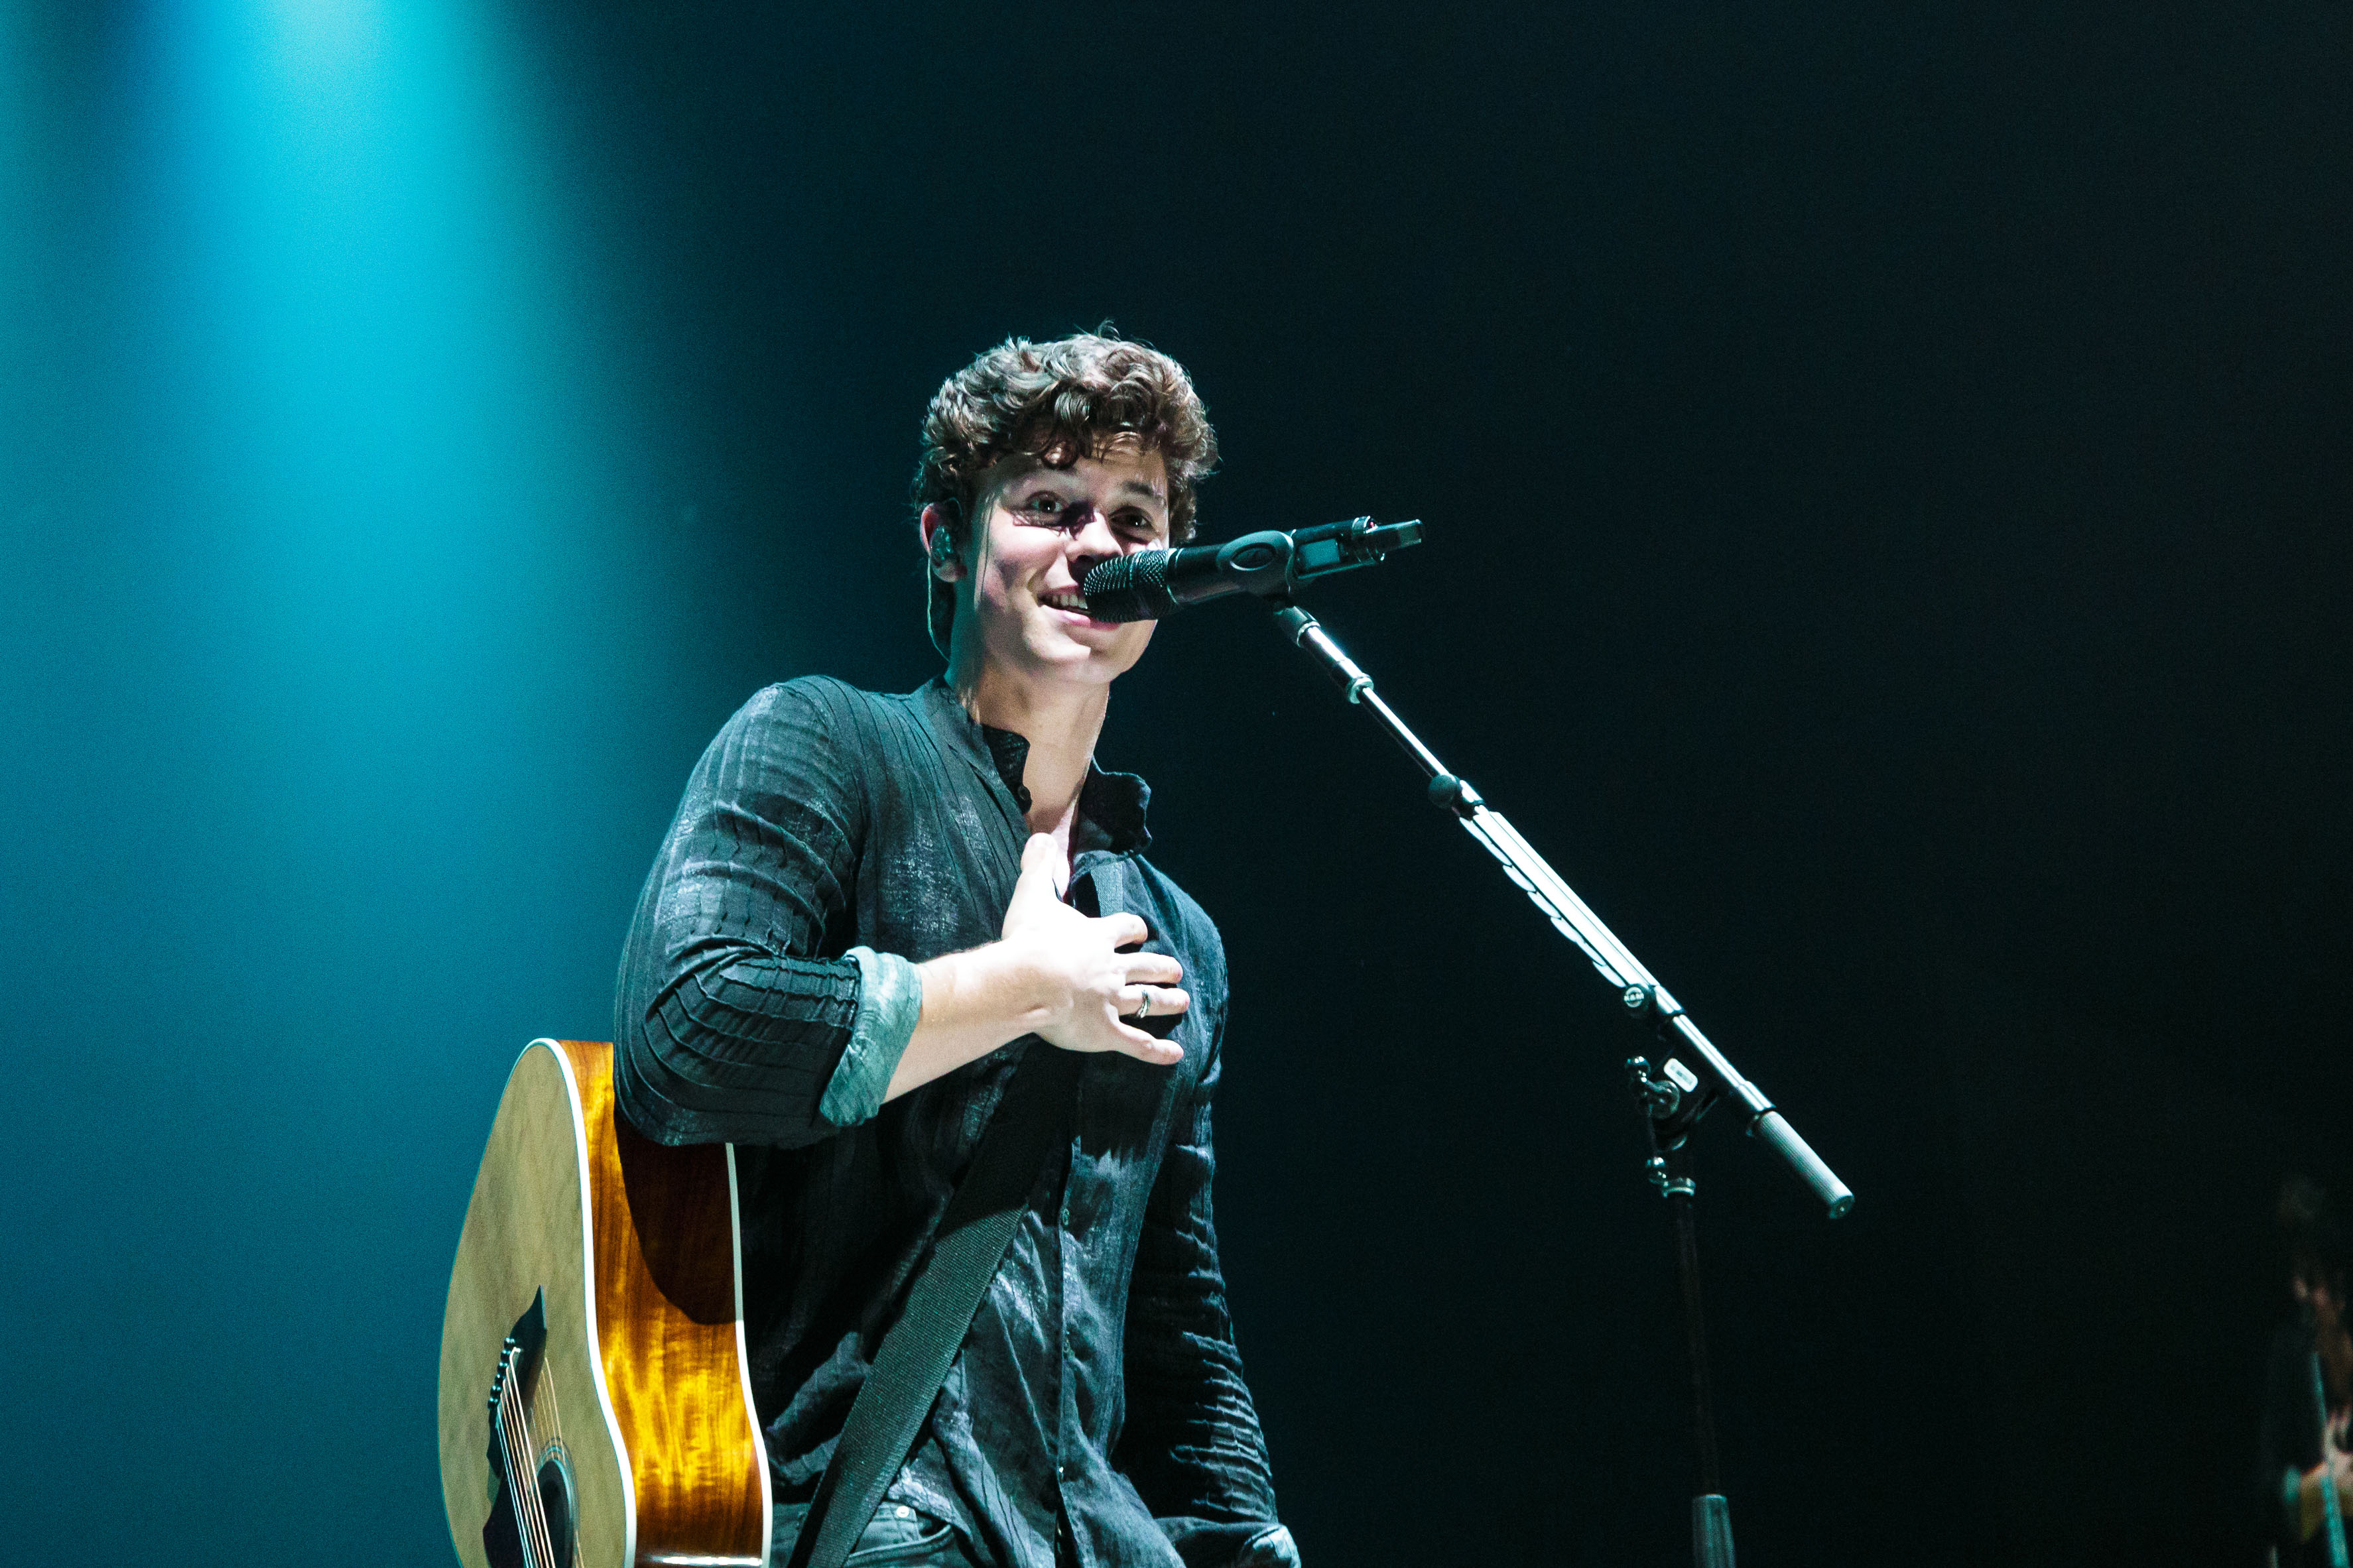 Shawn Mendes Patience - Shawn Mendes World Tour Enmore Theatre Sydney NSW  2/11/16 